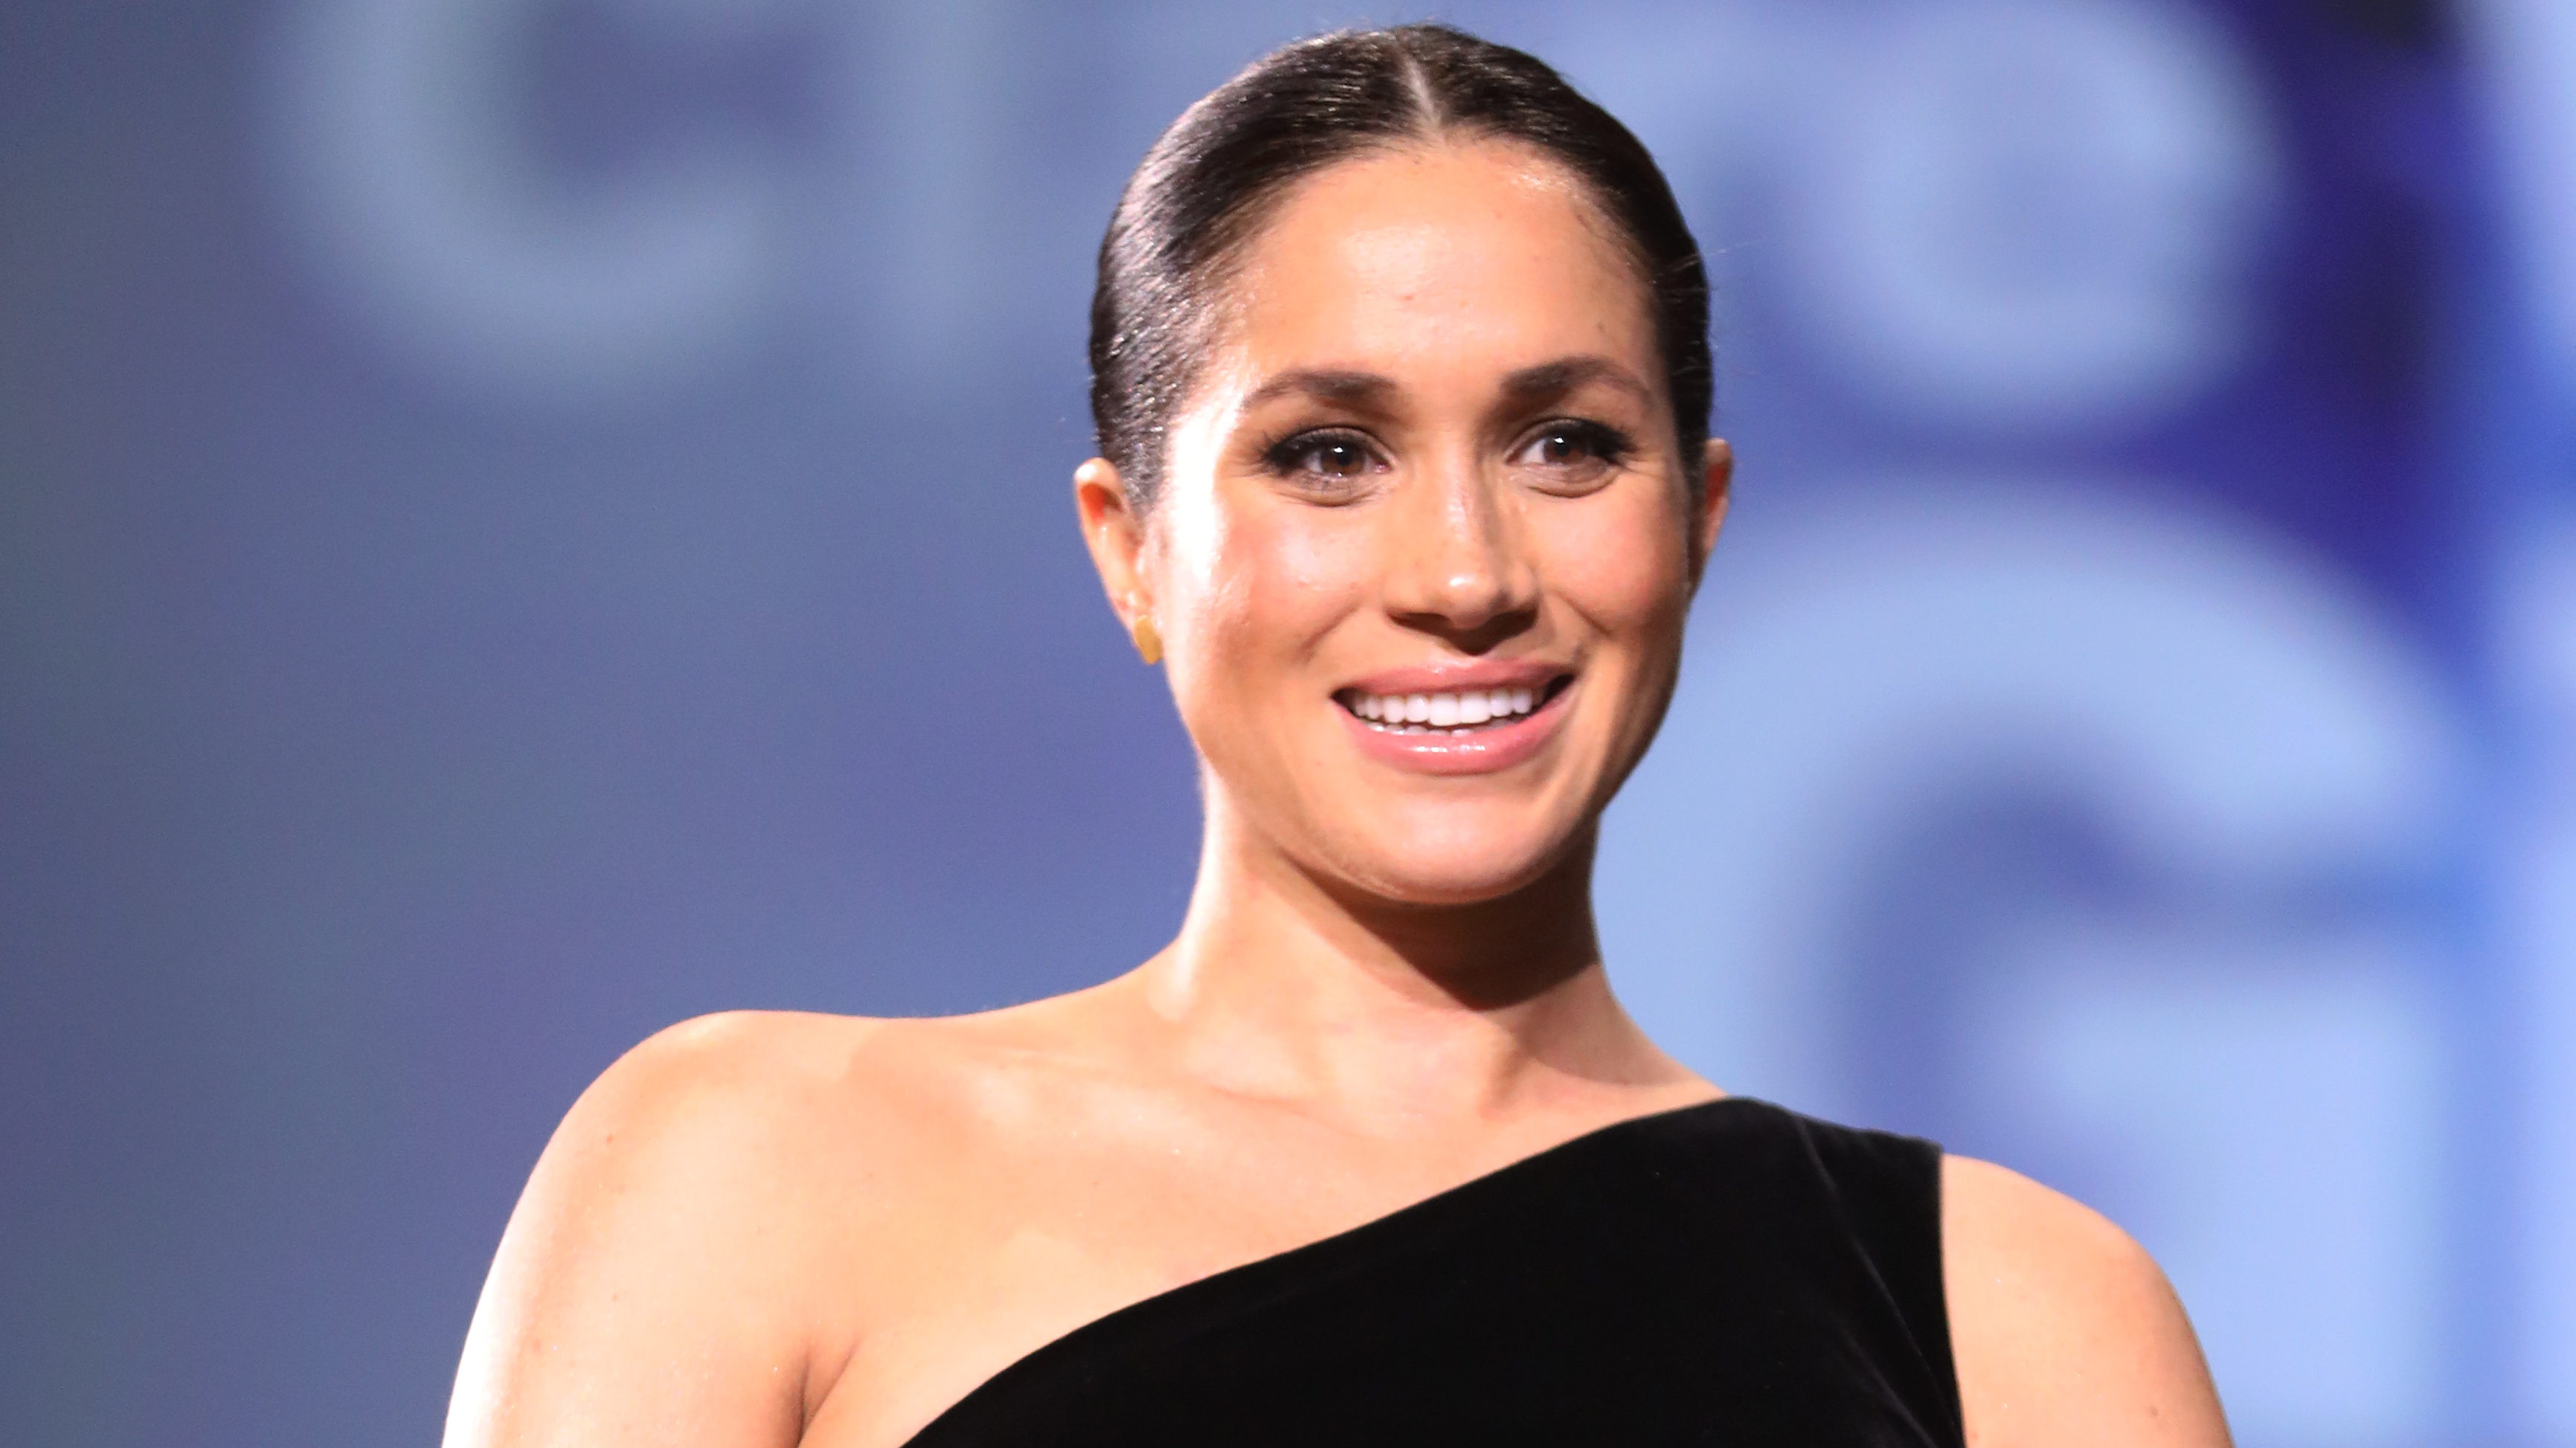 Duchess of Sussex meghan markle